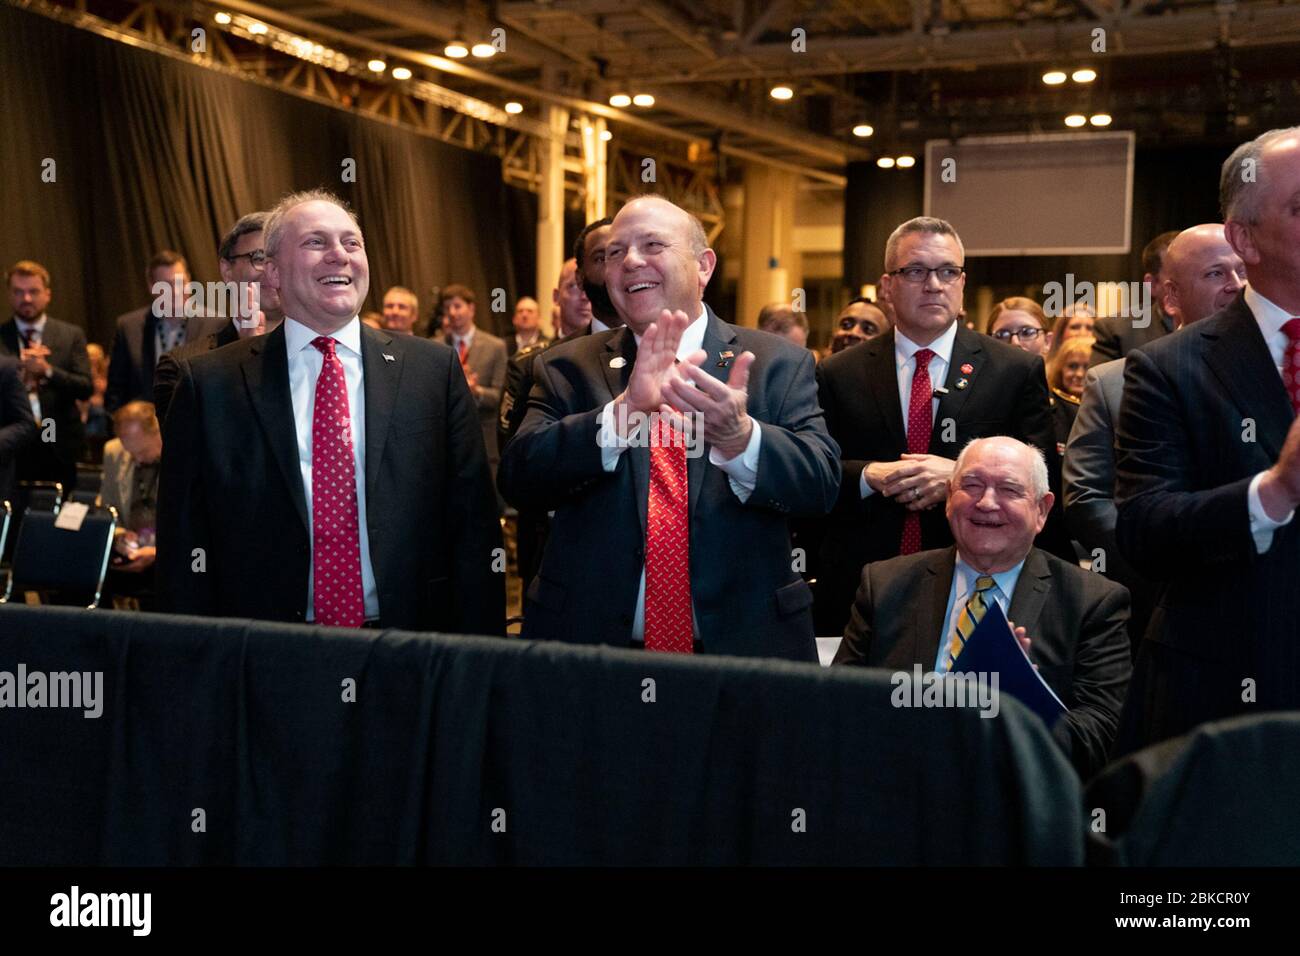 House Minority Whip Rep. Steve Scalise (R-LA), Zippy Duvall, the President of the American Farm Bureau Federation, and Secretary of Agriculture Sonny Perdue share a laugh with President Donald J. Trump during his remarks at the American Farm Bureau Federation’s 100th Annual Convention Monday, January 14, 2019, at the New Orleans Ernest N. Morial Convention Center, in New Orleans, Louisiana. President Trump Delivers Remarks in New Orleans Stock Photo